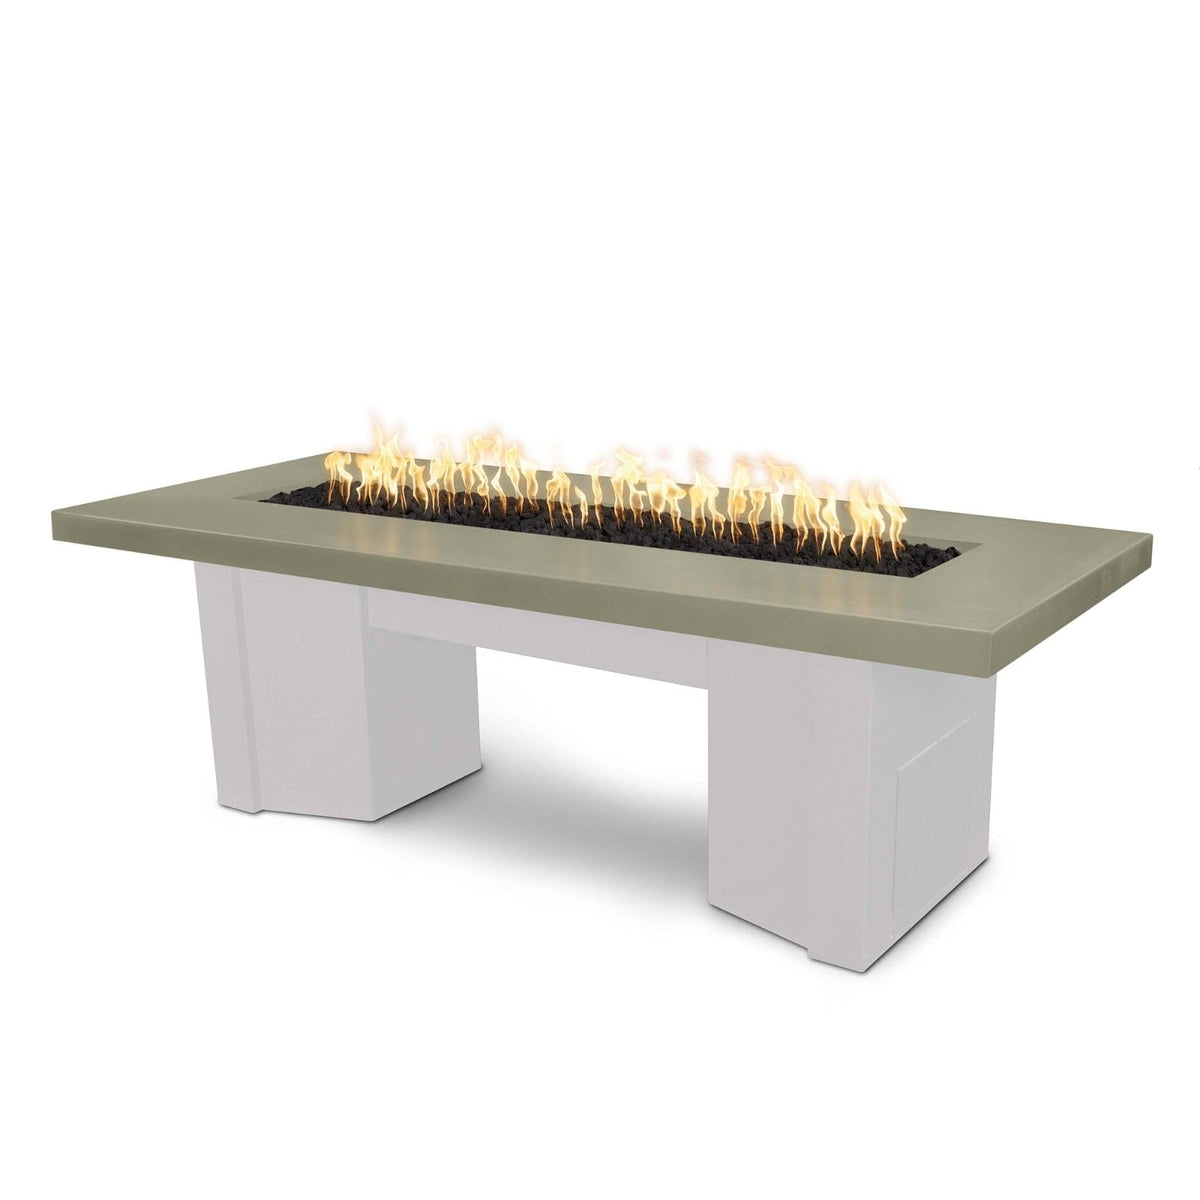 The Outdoor Plus Fire Features Ash (-ASH) / White Powder Coated Steel (-WHT) The Outdoor Plus 60&quot; Alameda Fire Table Smooth Concrete in Liquid Propane - Match Lit with Flame Sense System / OPT-ALMGFRC60FSML-LP